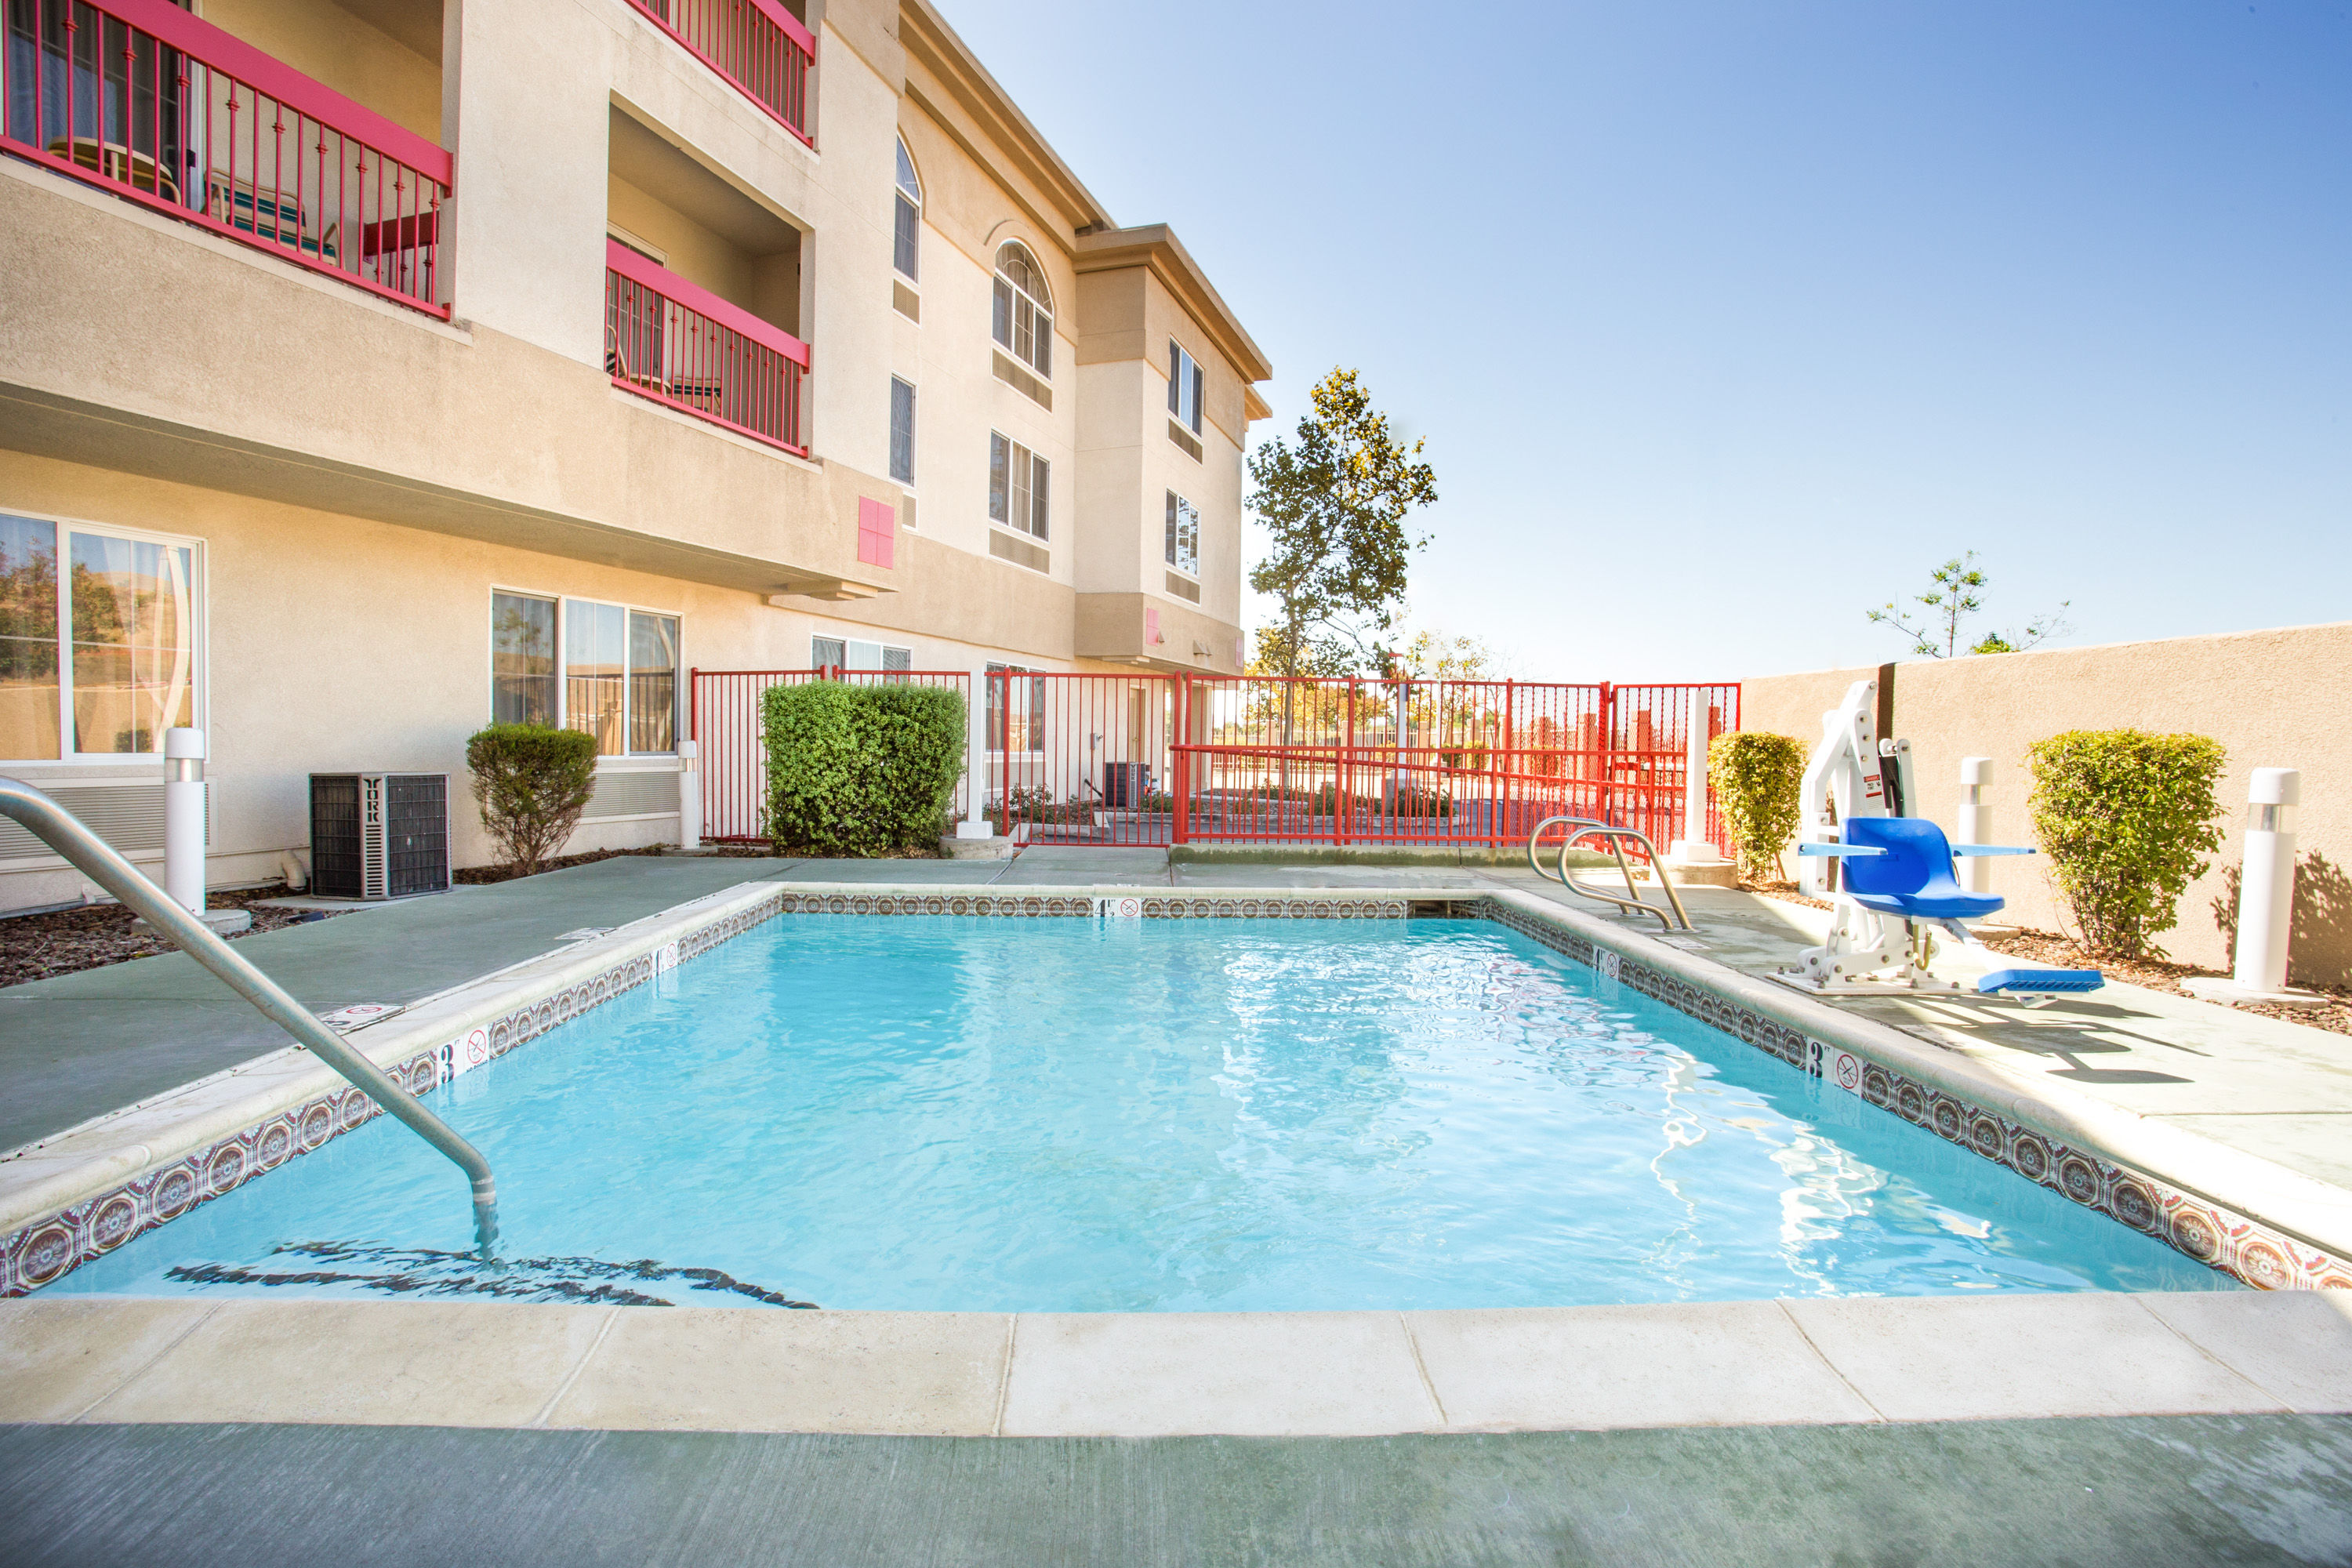 Hawthorn Suites By Wyndham Livermore Wine Country Livermore Ca Hotels 1568